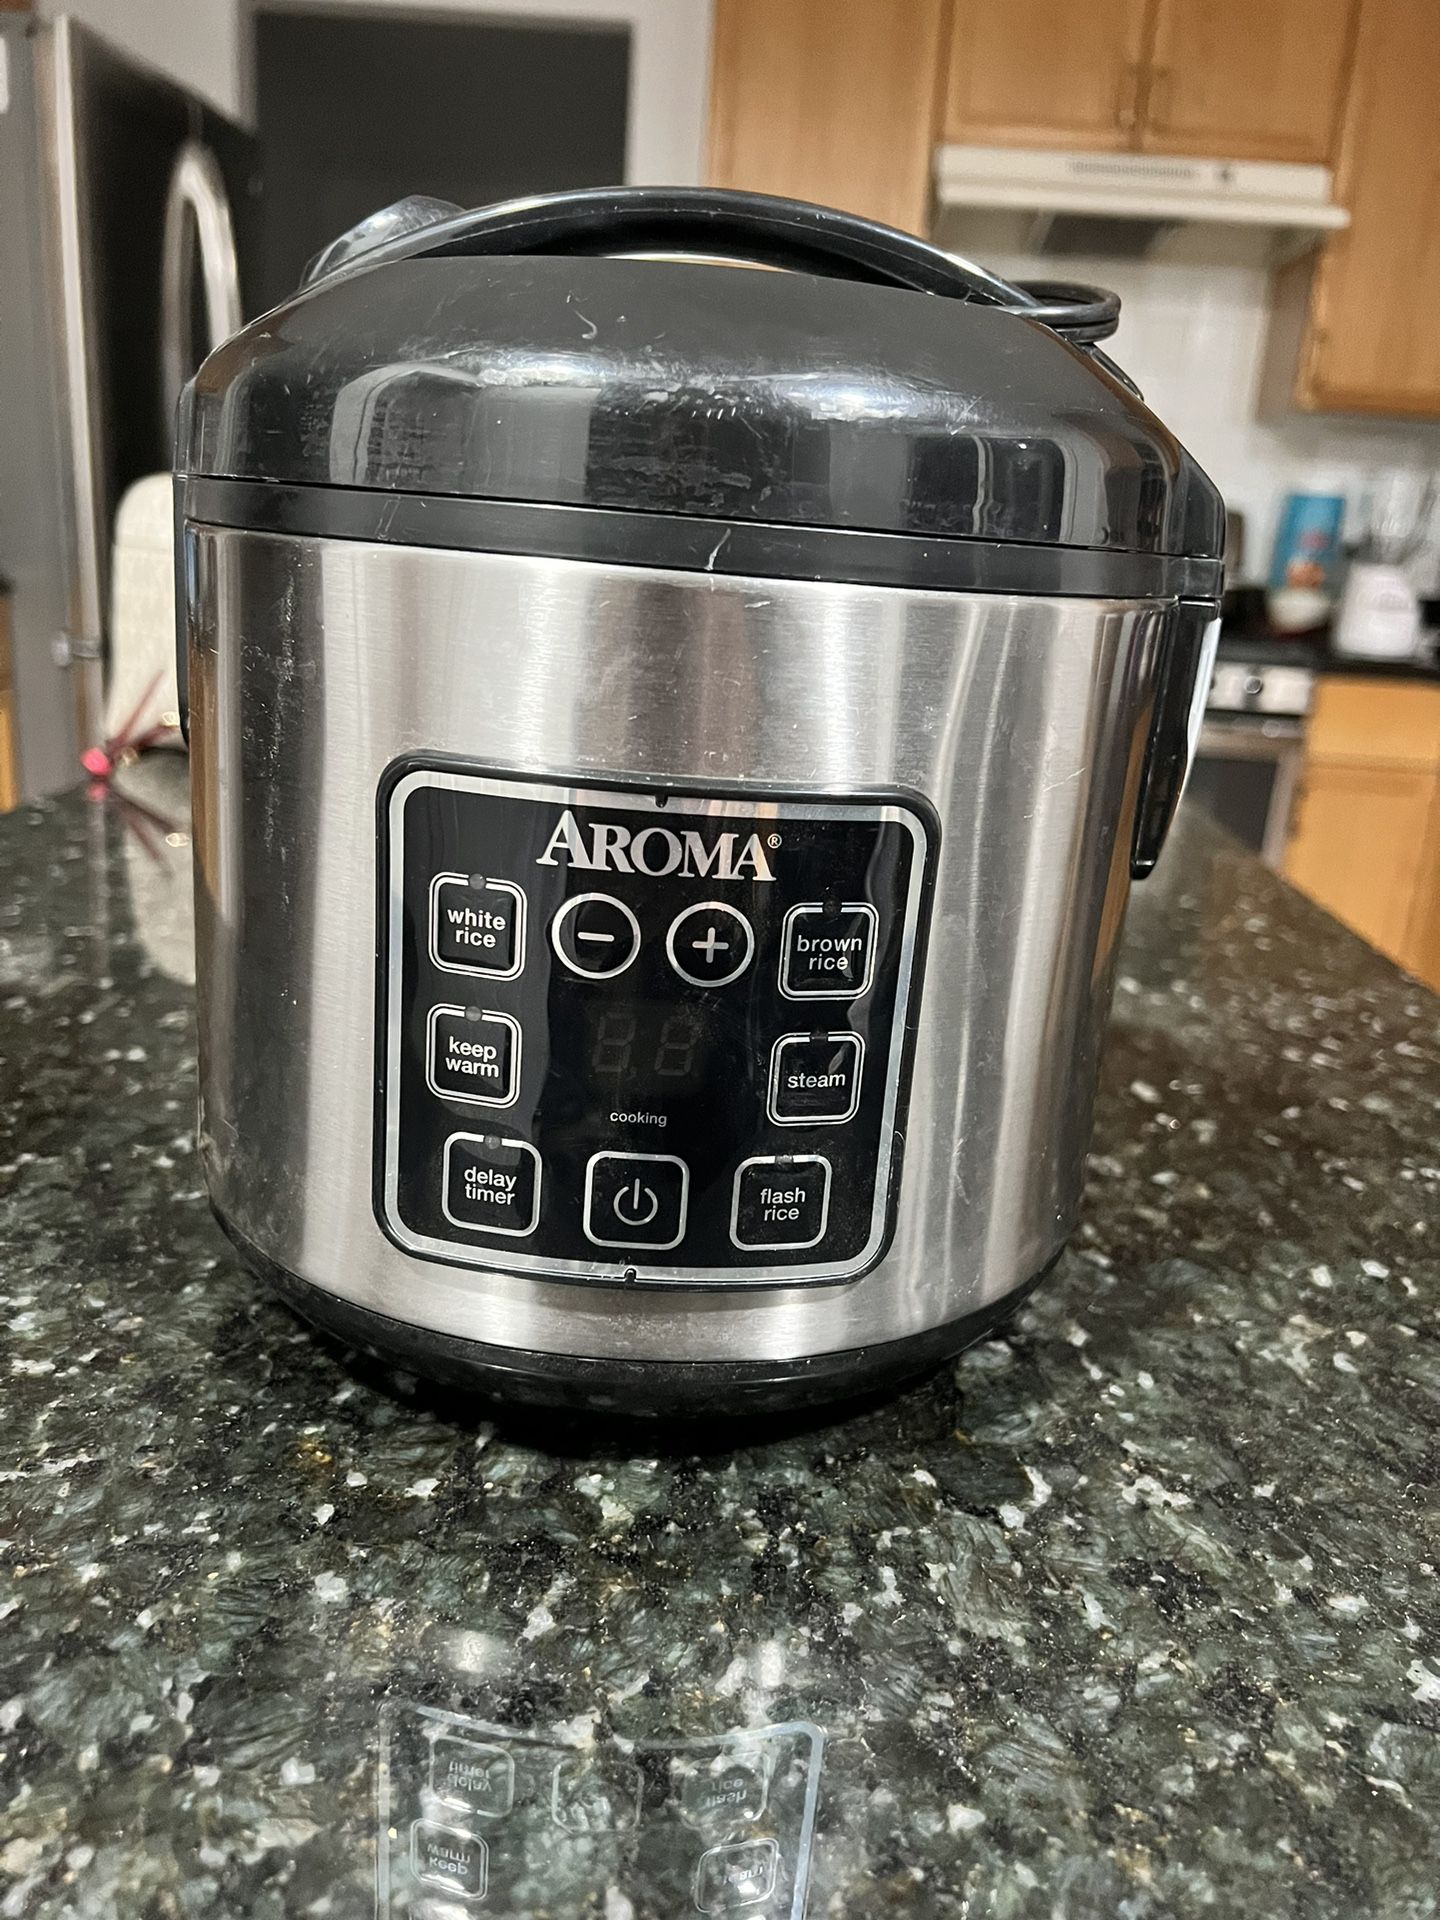 Very Nice Aroma Rice Cook Everything Work Very Good Condition Only $25